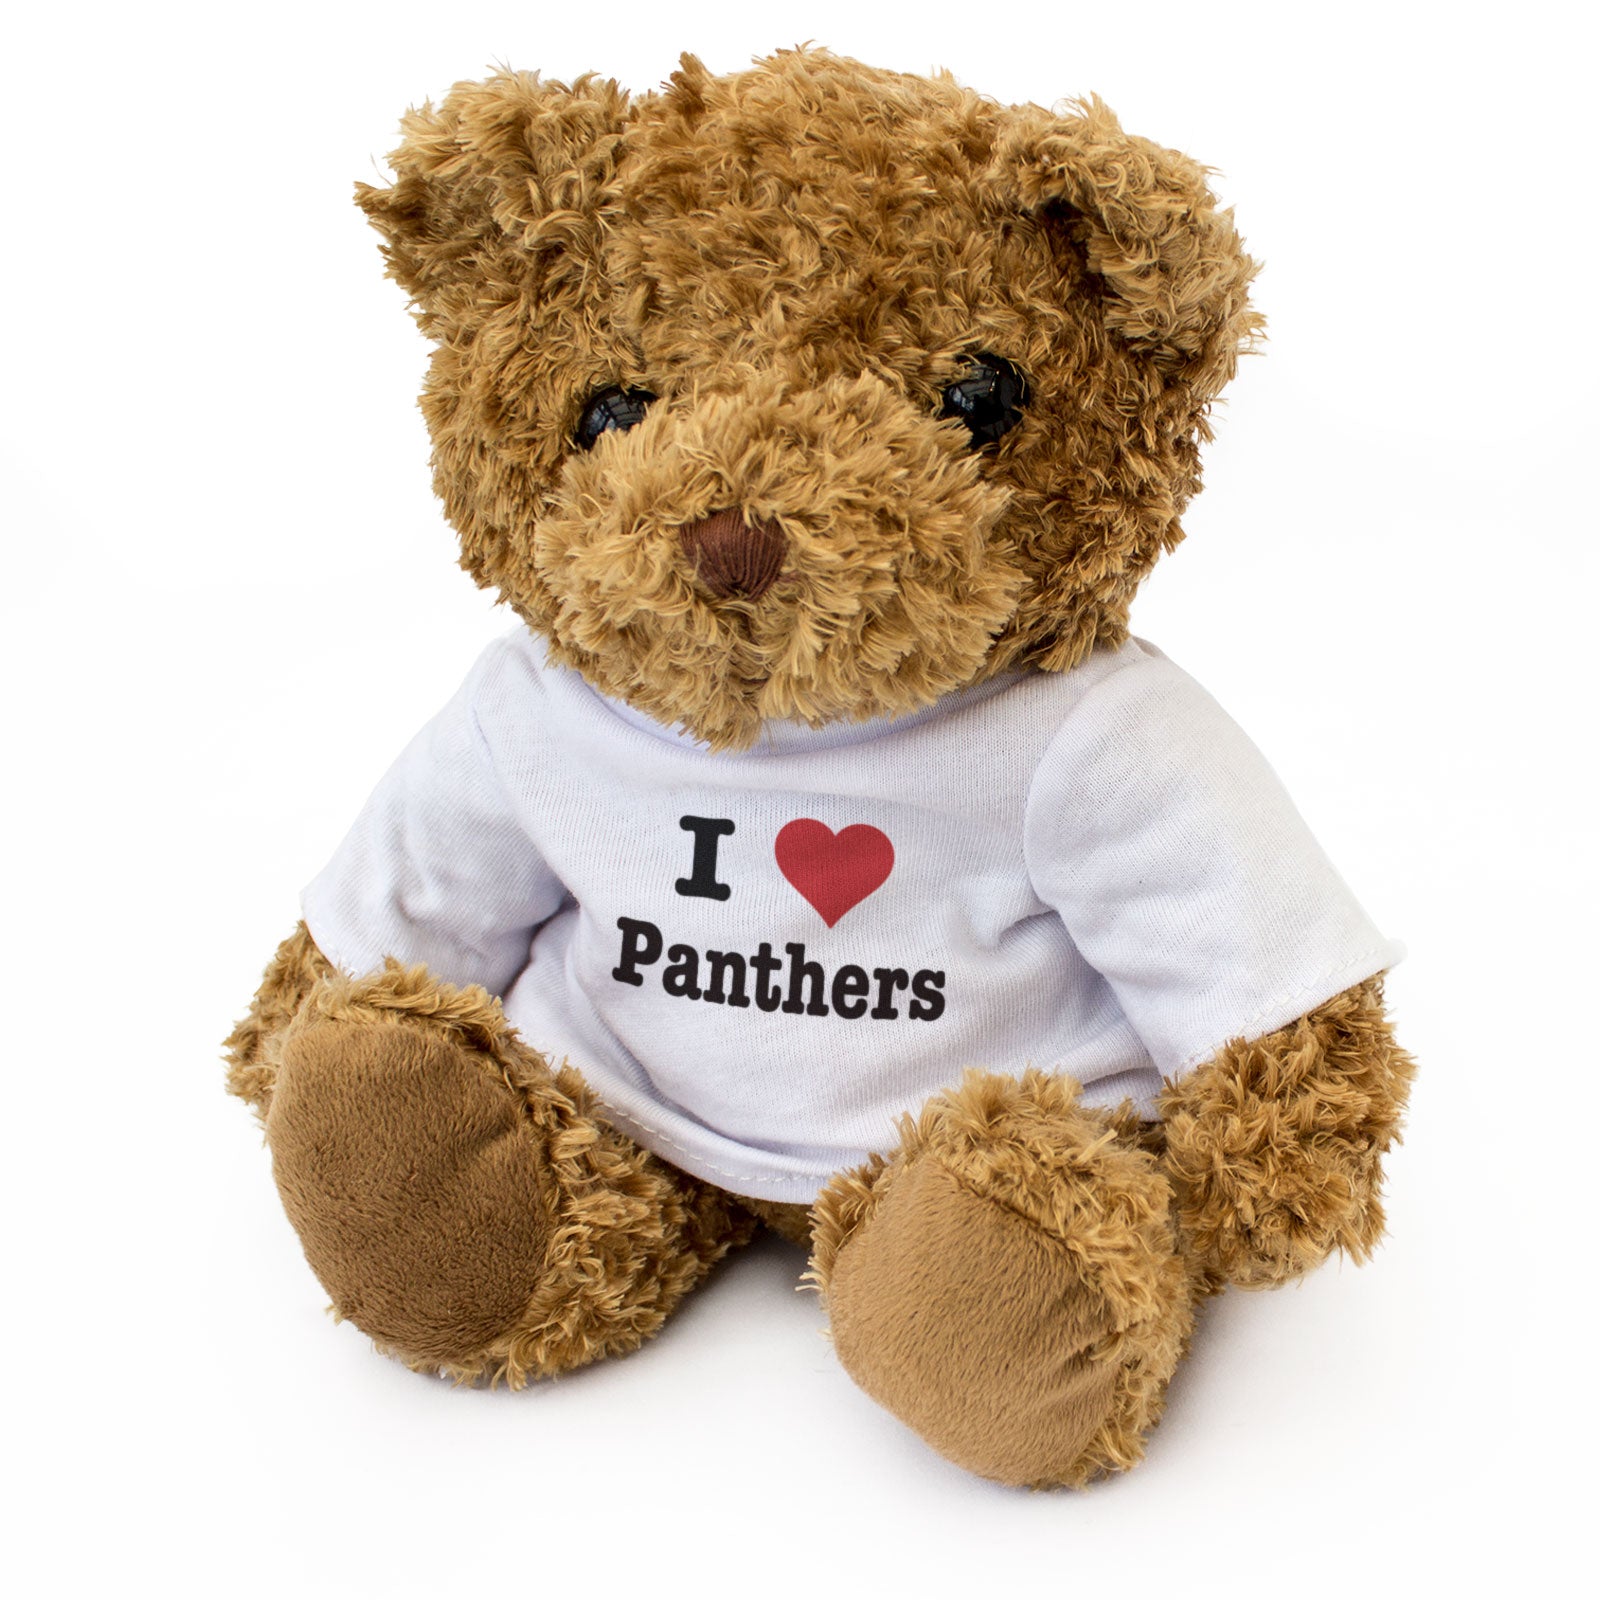 I Love Panthers - Teddy Bear